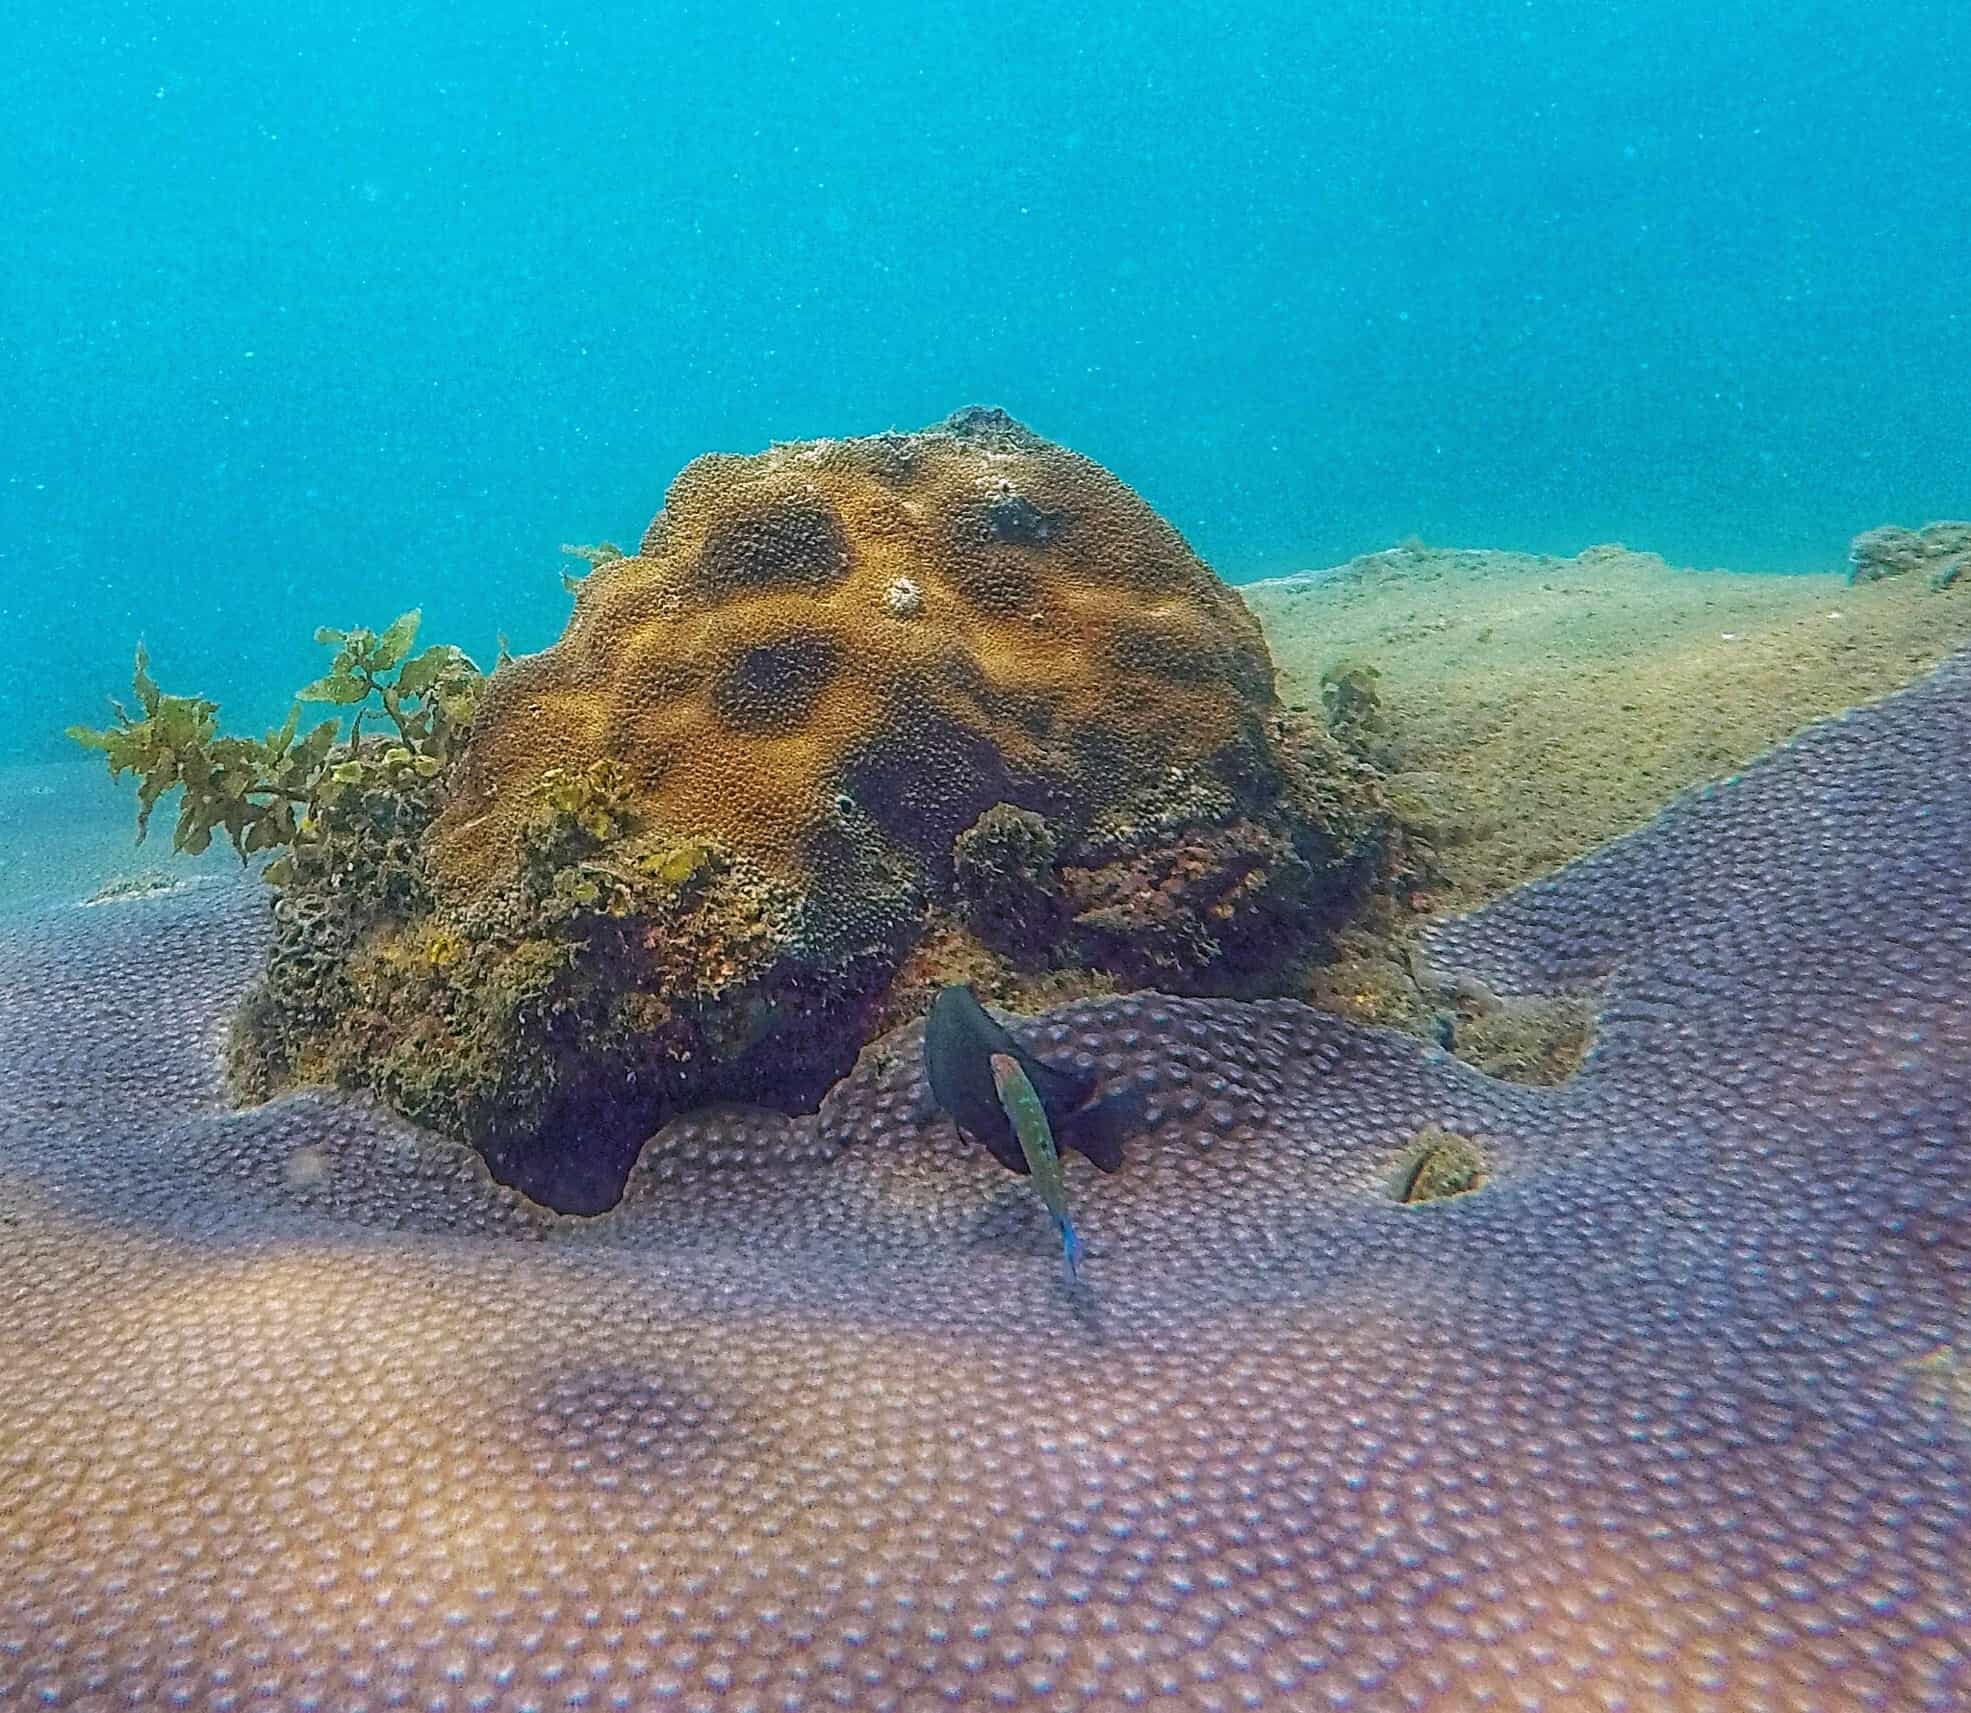 amongst the spreading coral